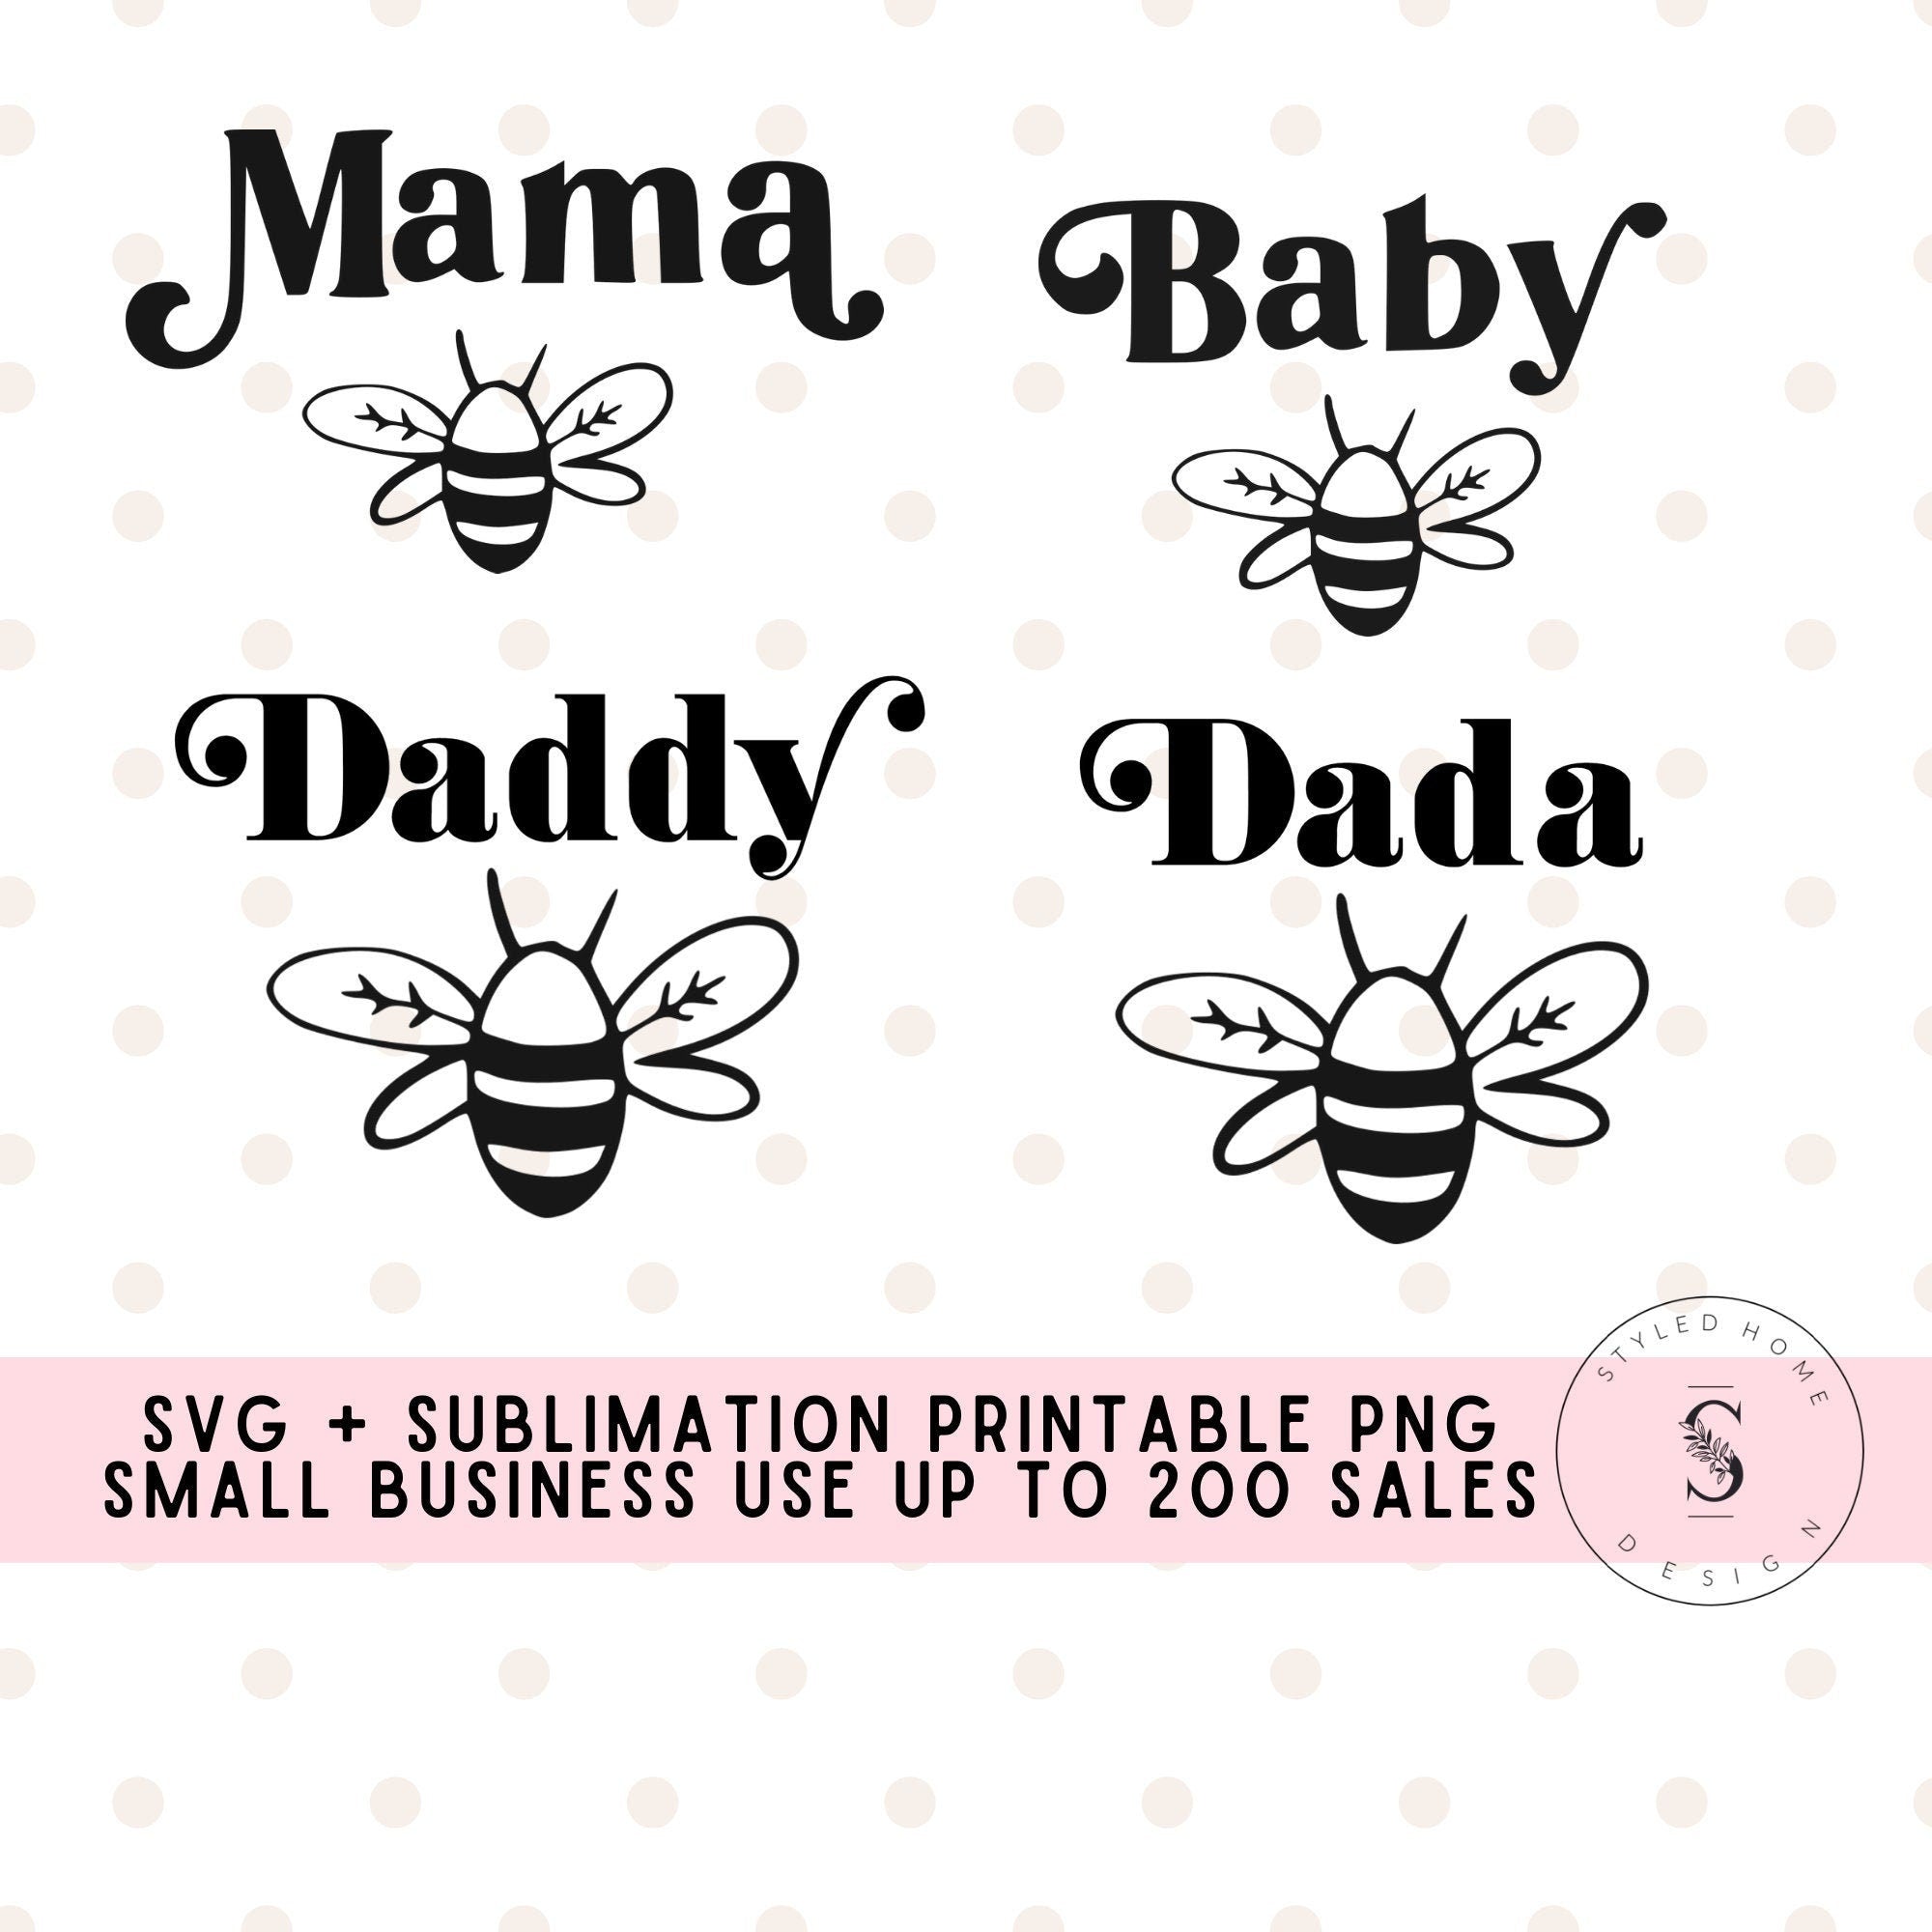 Mama Bee Baby Bee Bundle Mama's Main Squeeze Lemon Newborn SVG Cut File DXF Printable PNG Silhouette CricutSublimation